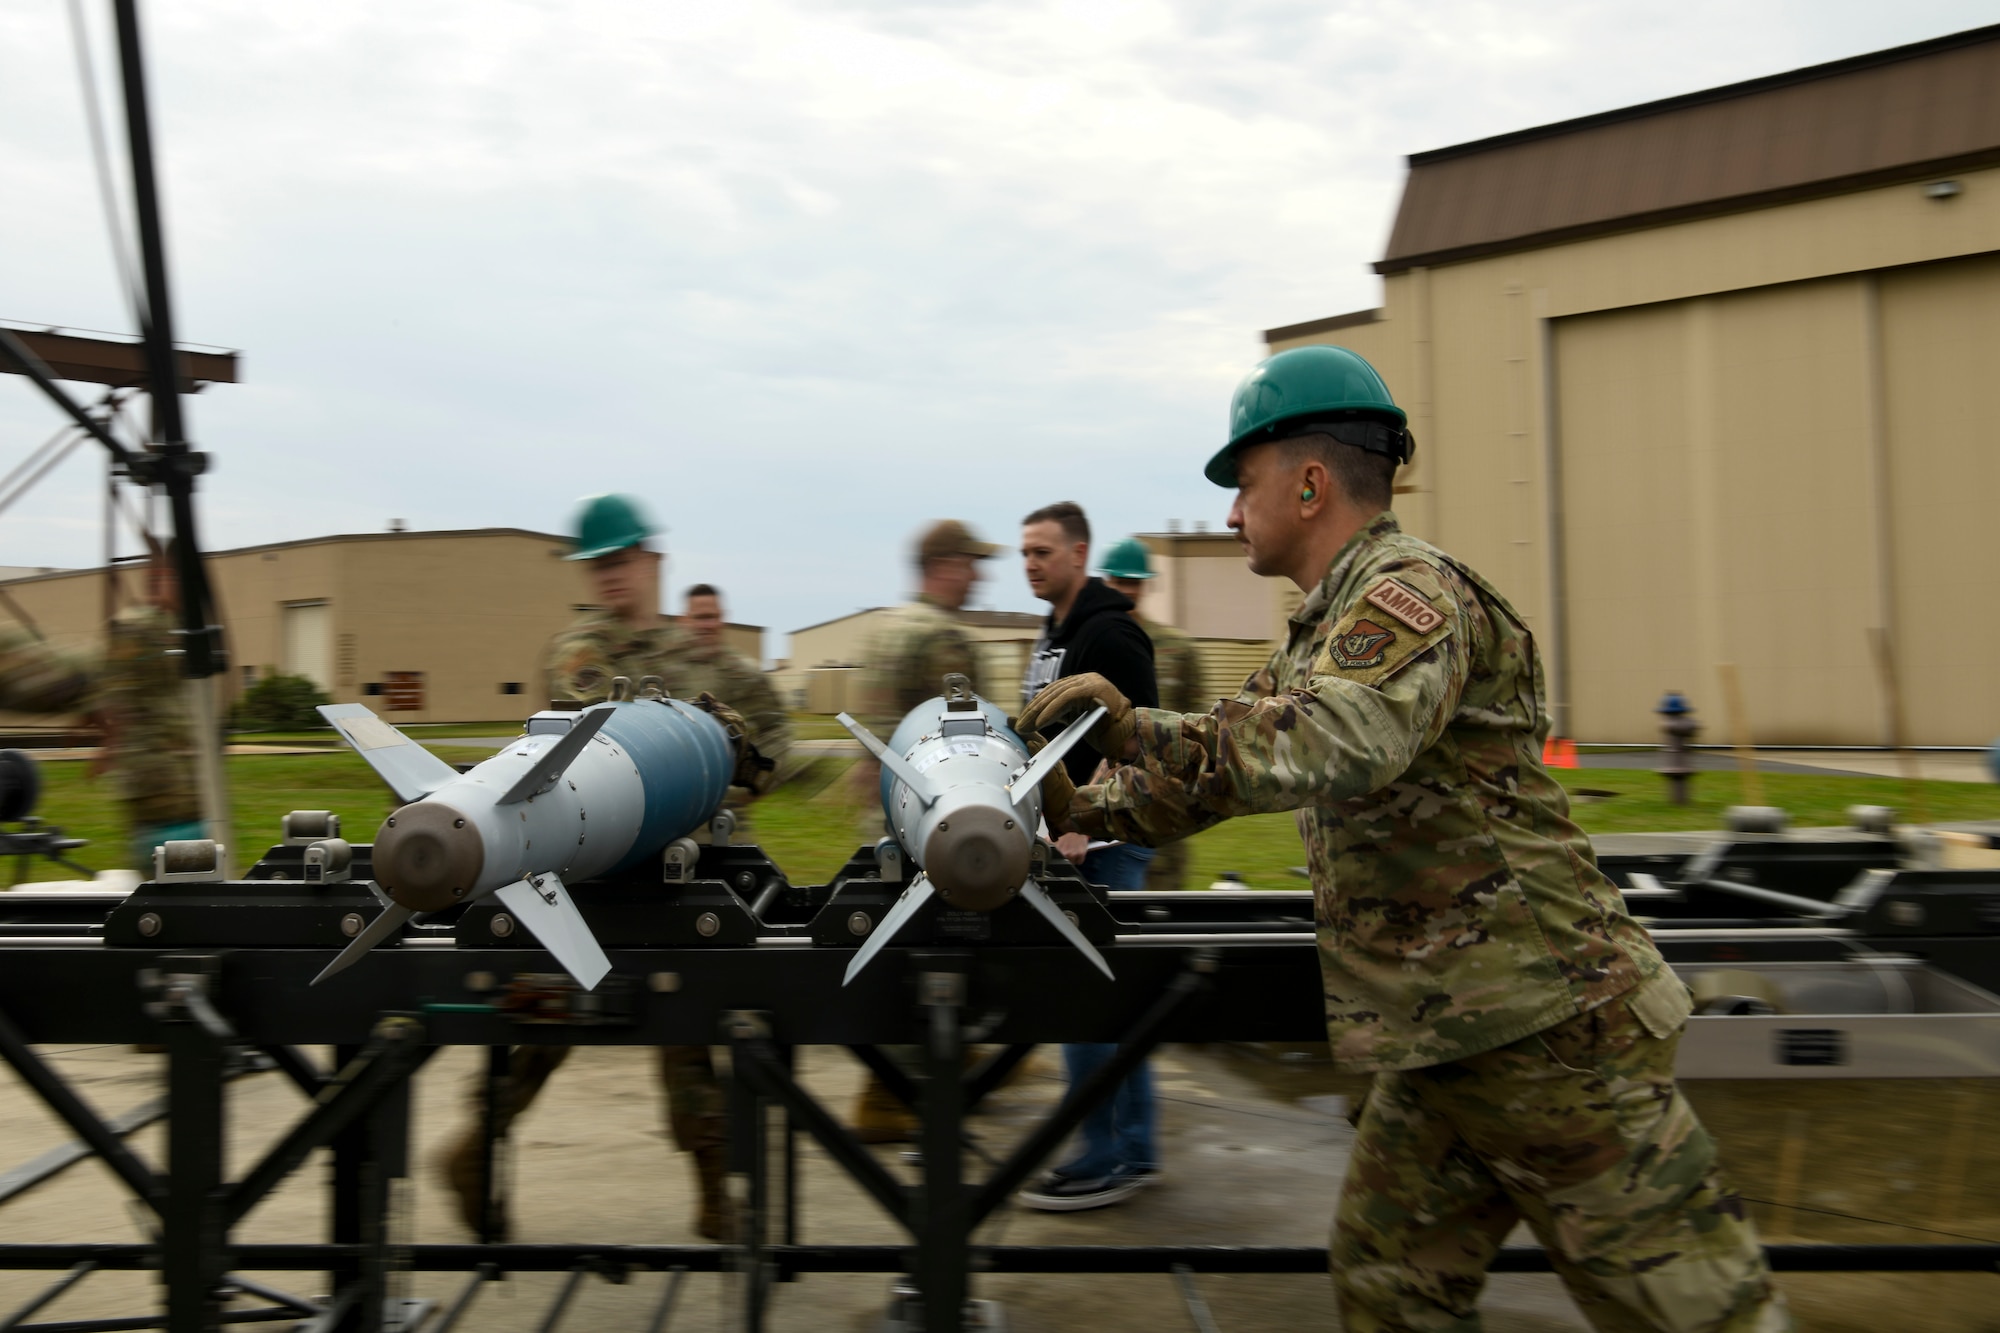 Tech Sgt. Robert Wiley, 8th Maintenance Squadron munitions technician, pushes GBU-38 bombs during the Third Quarter Load Crew Competition at Kunsan Air Base, Republic of Korea, Oct. 16, 2021. This quarter, munitions technicians had the opportunity to compete against each other in a bomb building competition. (U.S. Air Force photo by Staff Sgt. Jesenia Landaverde)